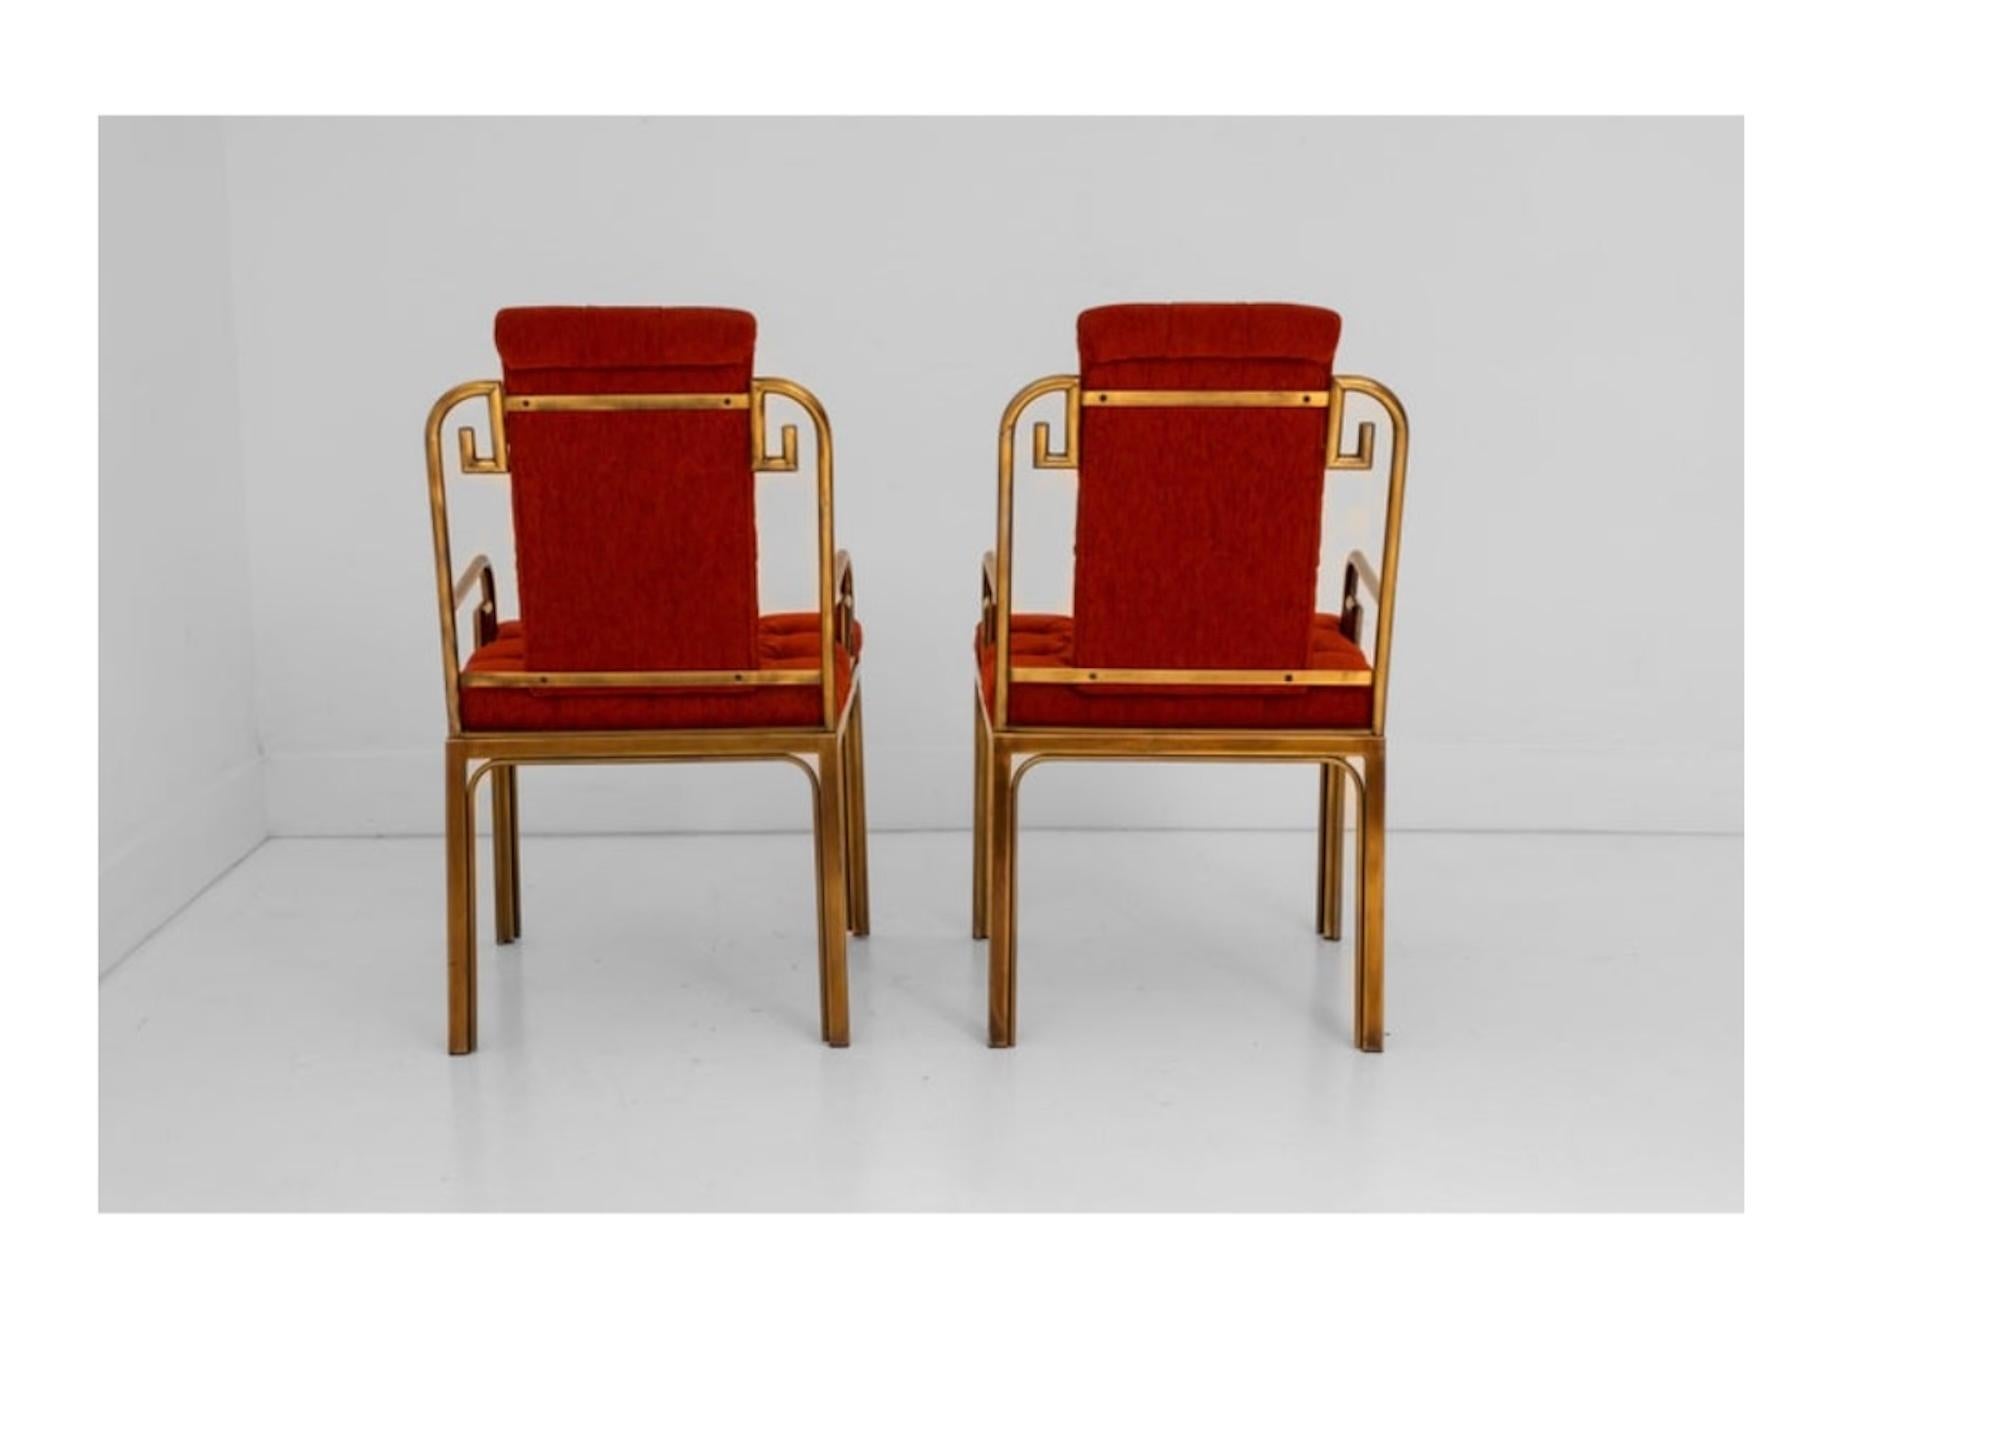 Private listing includes:

A Pair of Brass Greek Key Chairs Designed by Bernhard Rohne for Master Craft (LU797728973742)
Chairs - 19”D x 20.5”W x 37”H x 19”

Backgammon Table, Chrome Metal and Burlwood Veneer, Tommaso Barbi, Italy 1970s